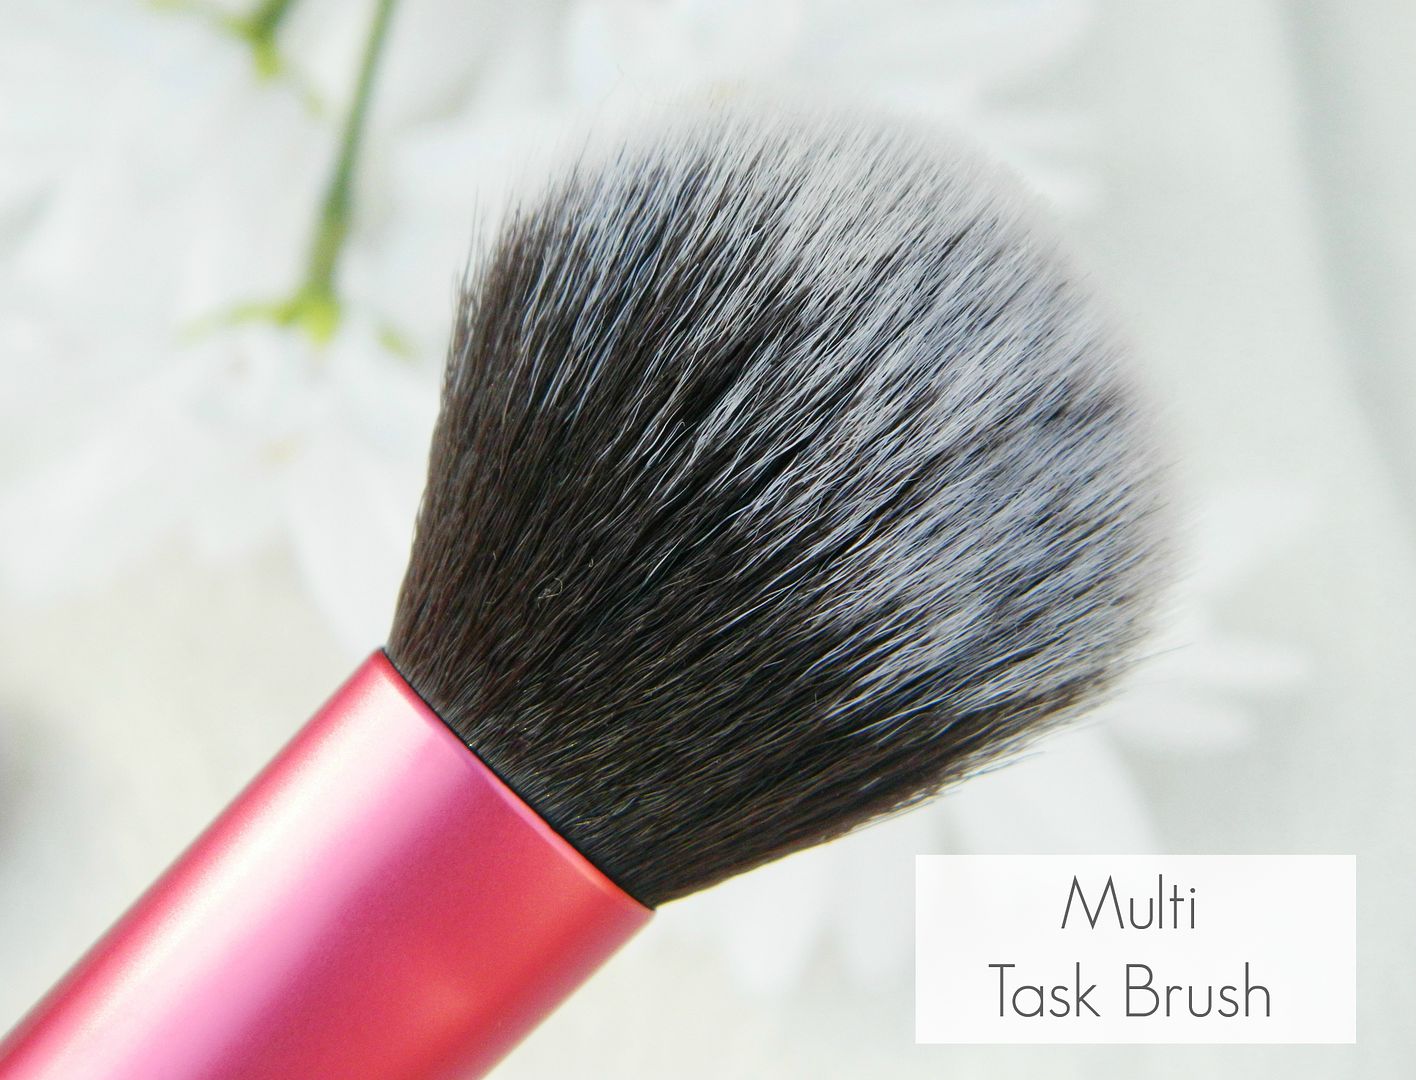 Real Techniques Travel Essentials Brush Set Review Multi Task Purpose Face Brush Belle-amie UK Beauty Fashion Lifestyle Blog